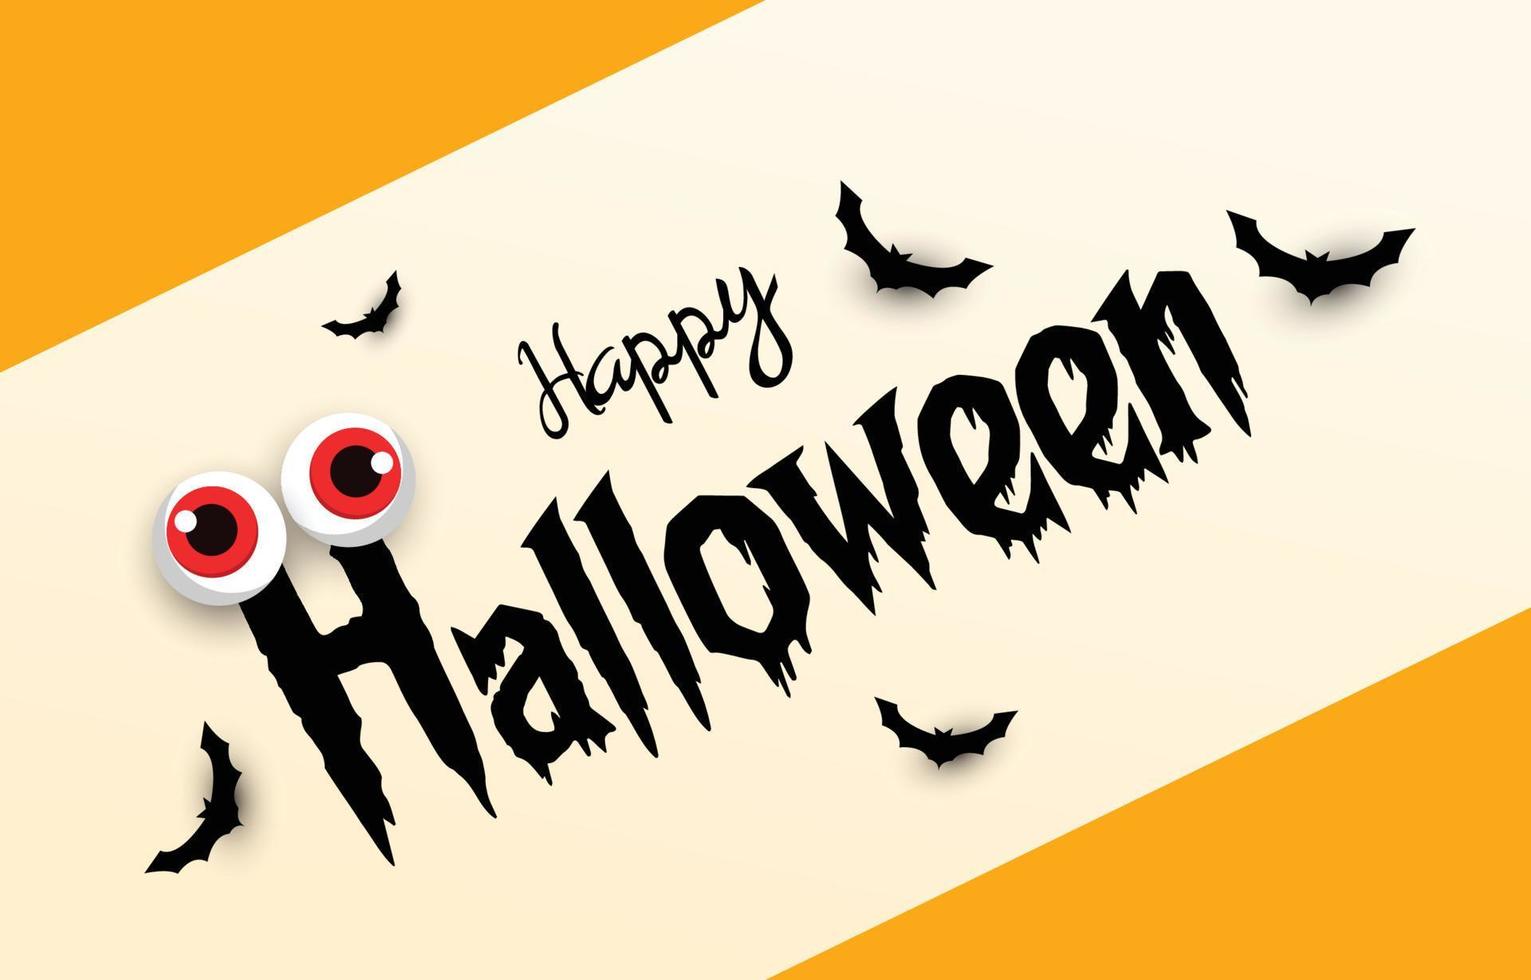 Halloween greeting card. Art letters decorated with eyeball ghosts and bats. Invitation card idea or gift giving away ghost. vector illustration background